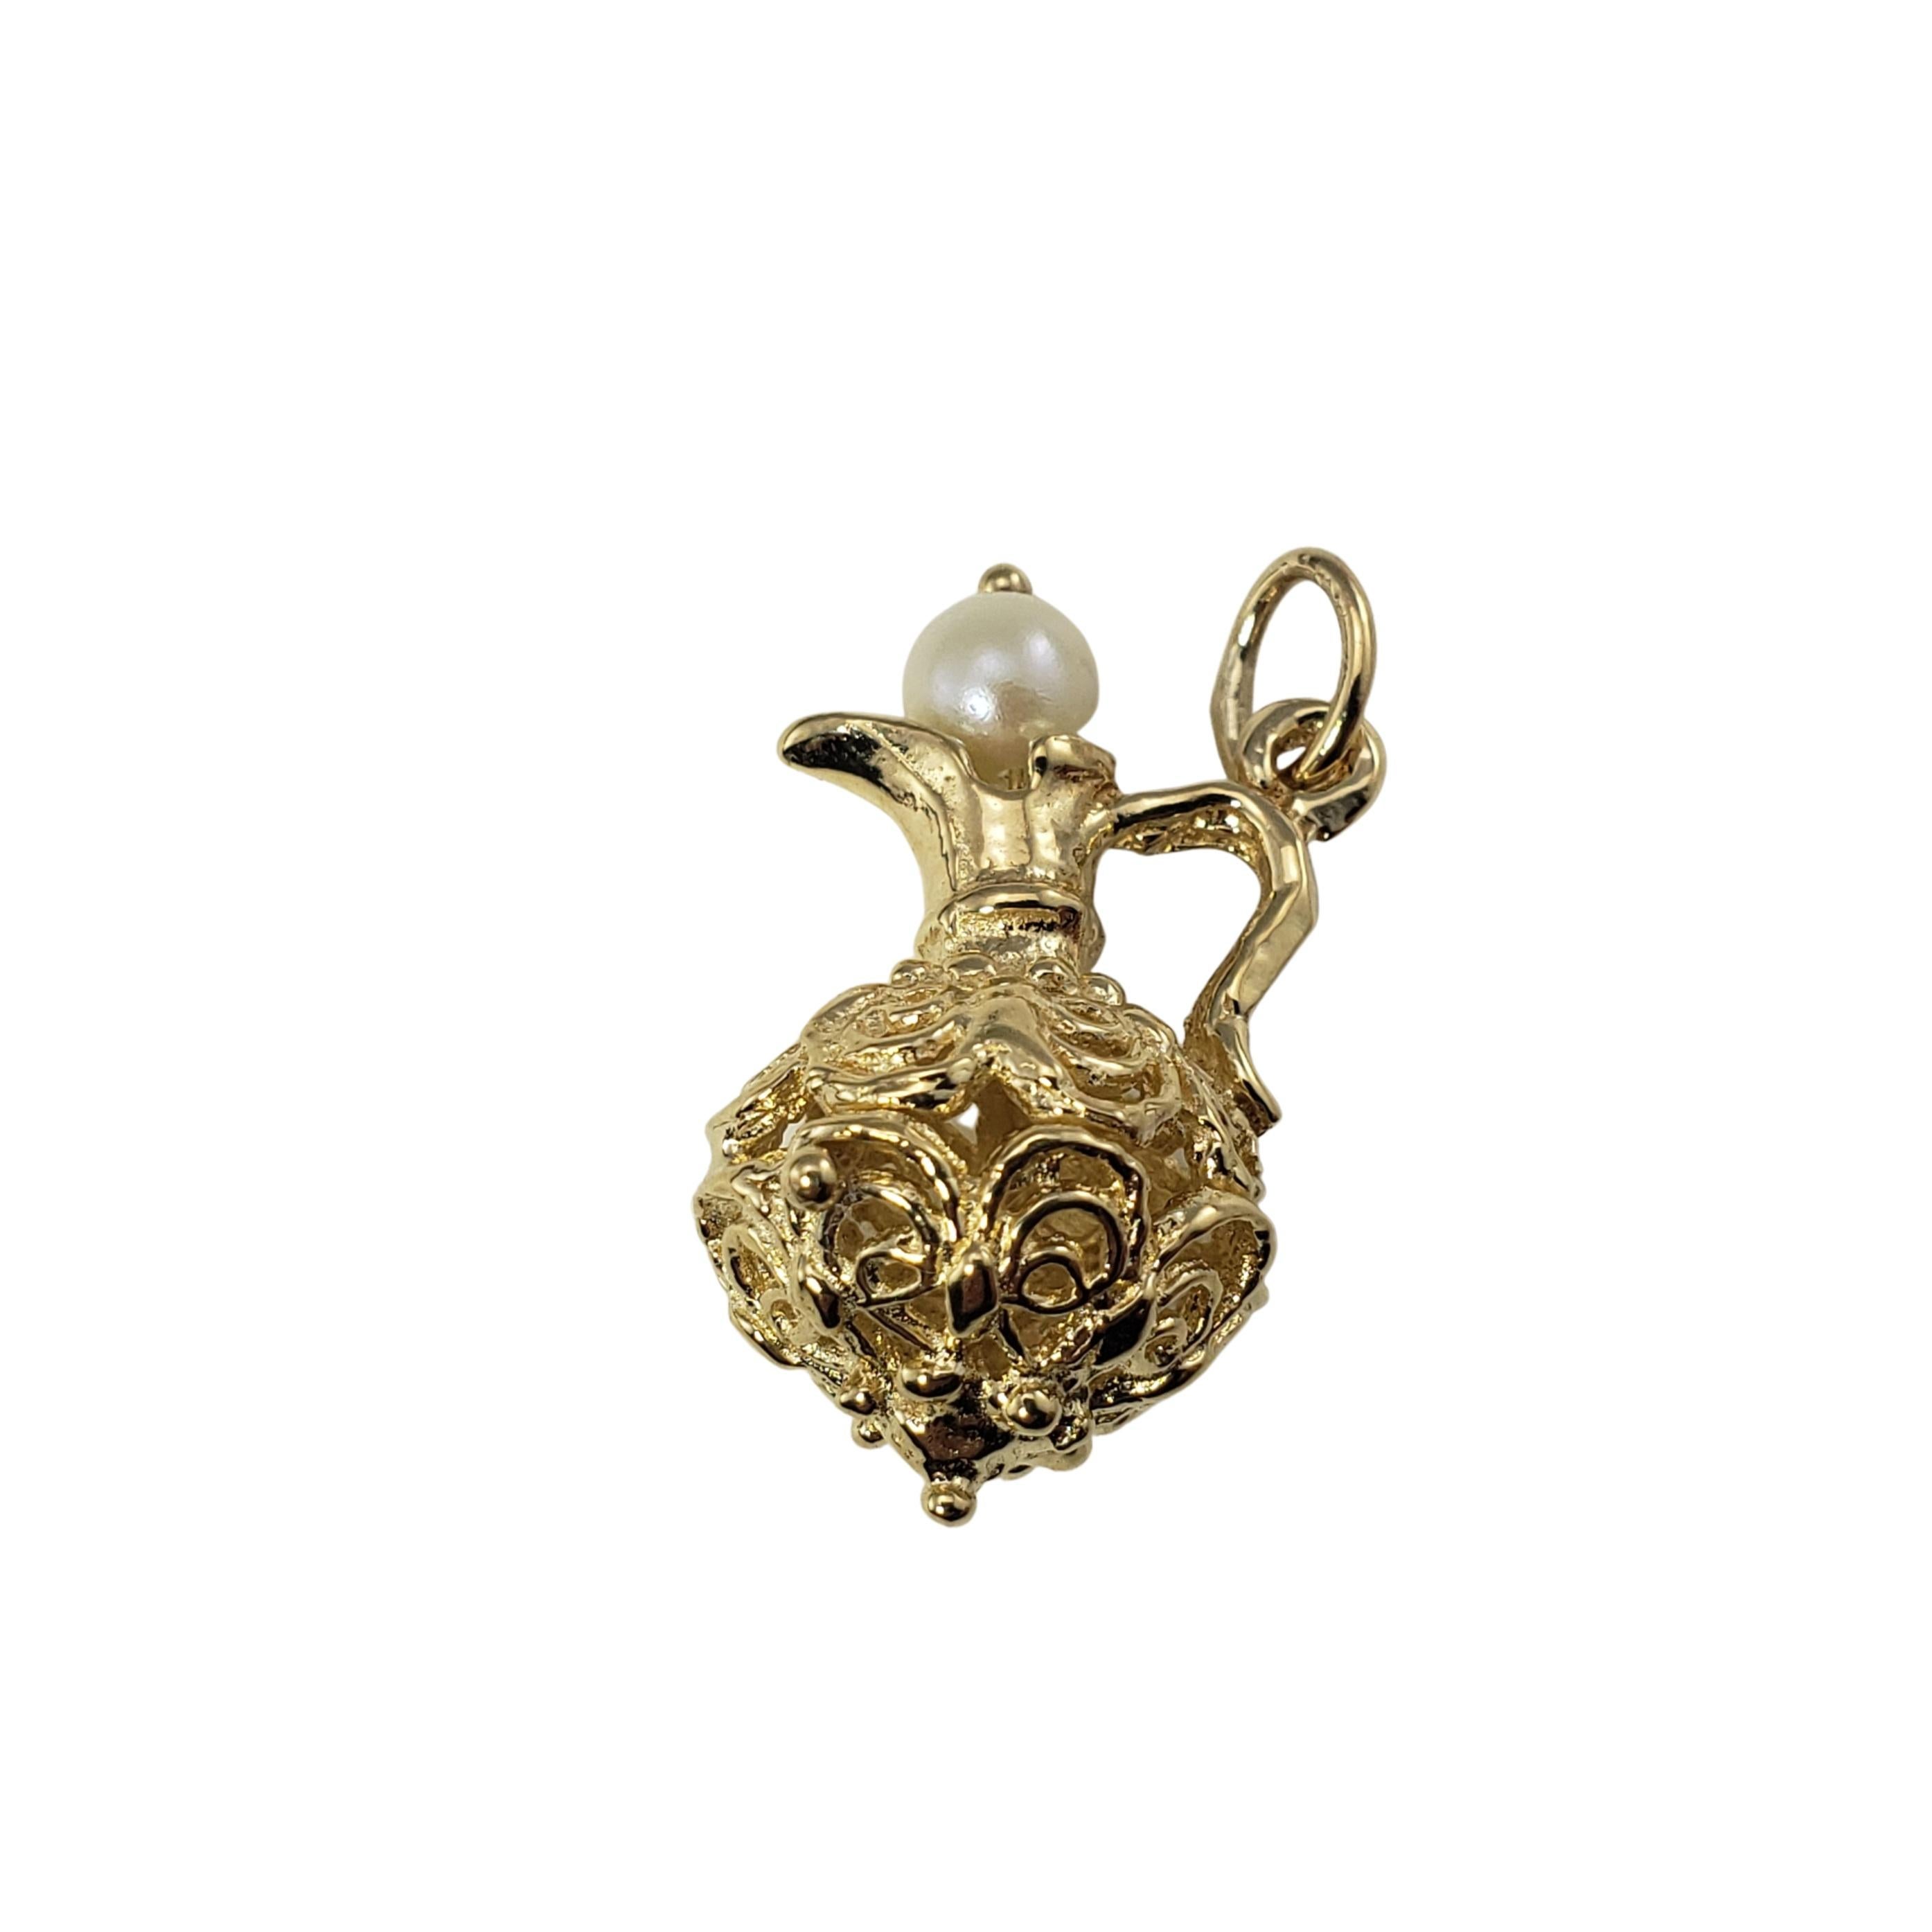 14 Karat Yellow Gold and Pearl Pitcher Charm-

This lovely 3D 14K yellow gold charm features a beautifully detailed pitcher accented with one 5 mm white pearl. 

Size:  25 mm x 14 mm

Weight:   3.2 dwt. /  5.0 gr.

Tested for 14K gold

Very good